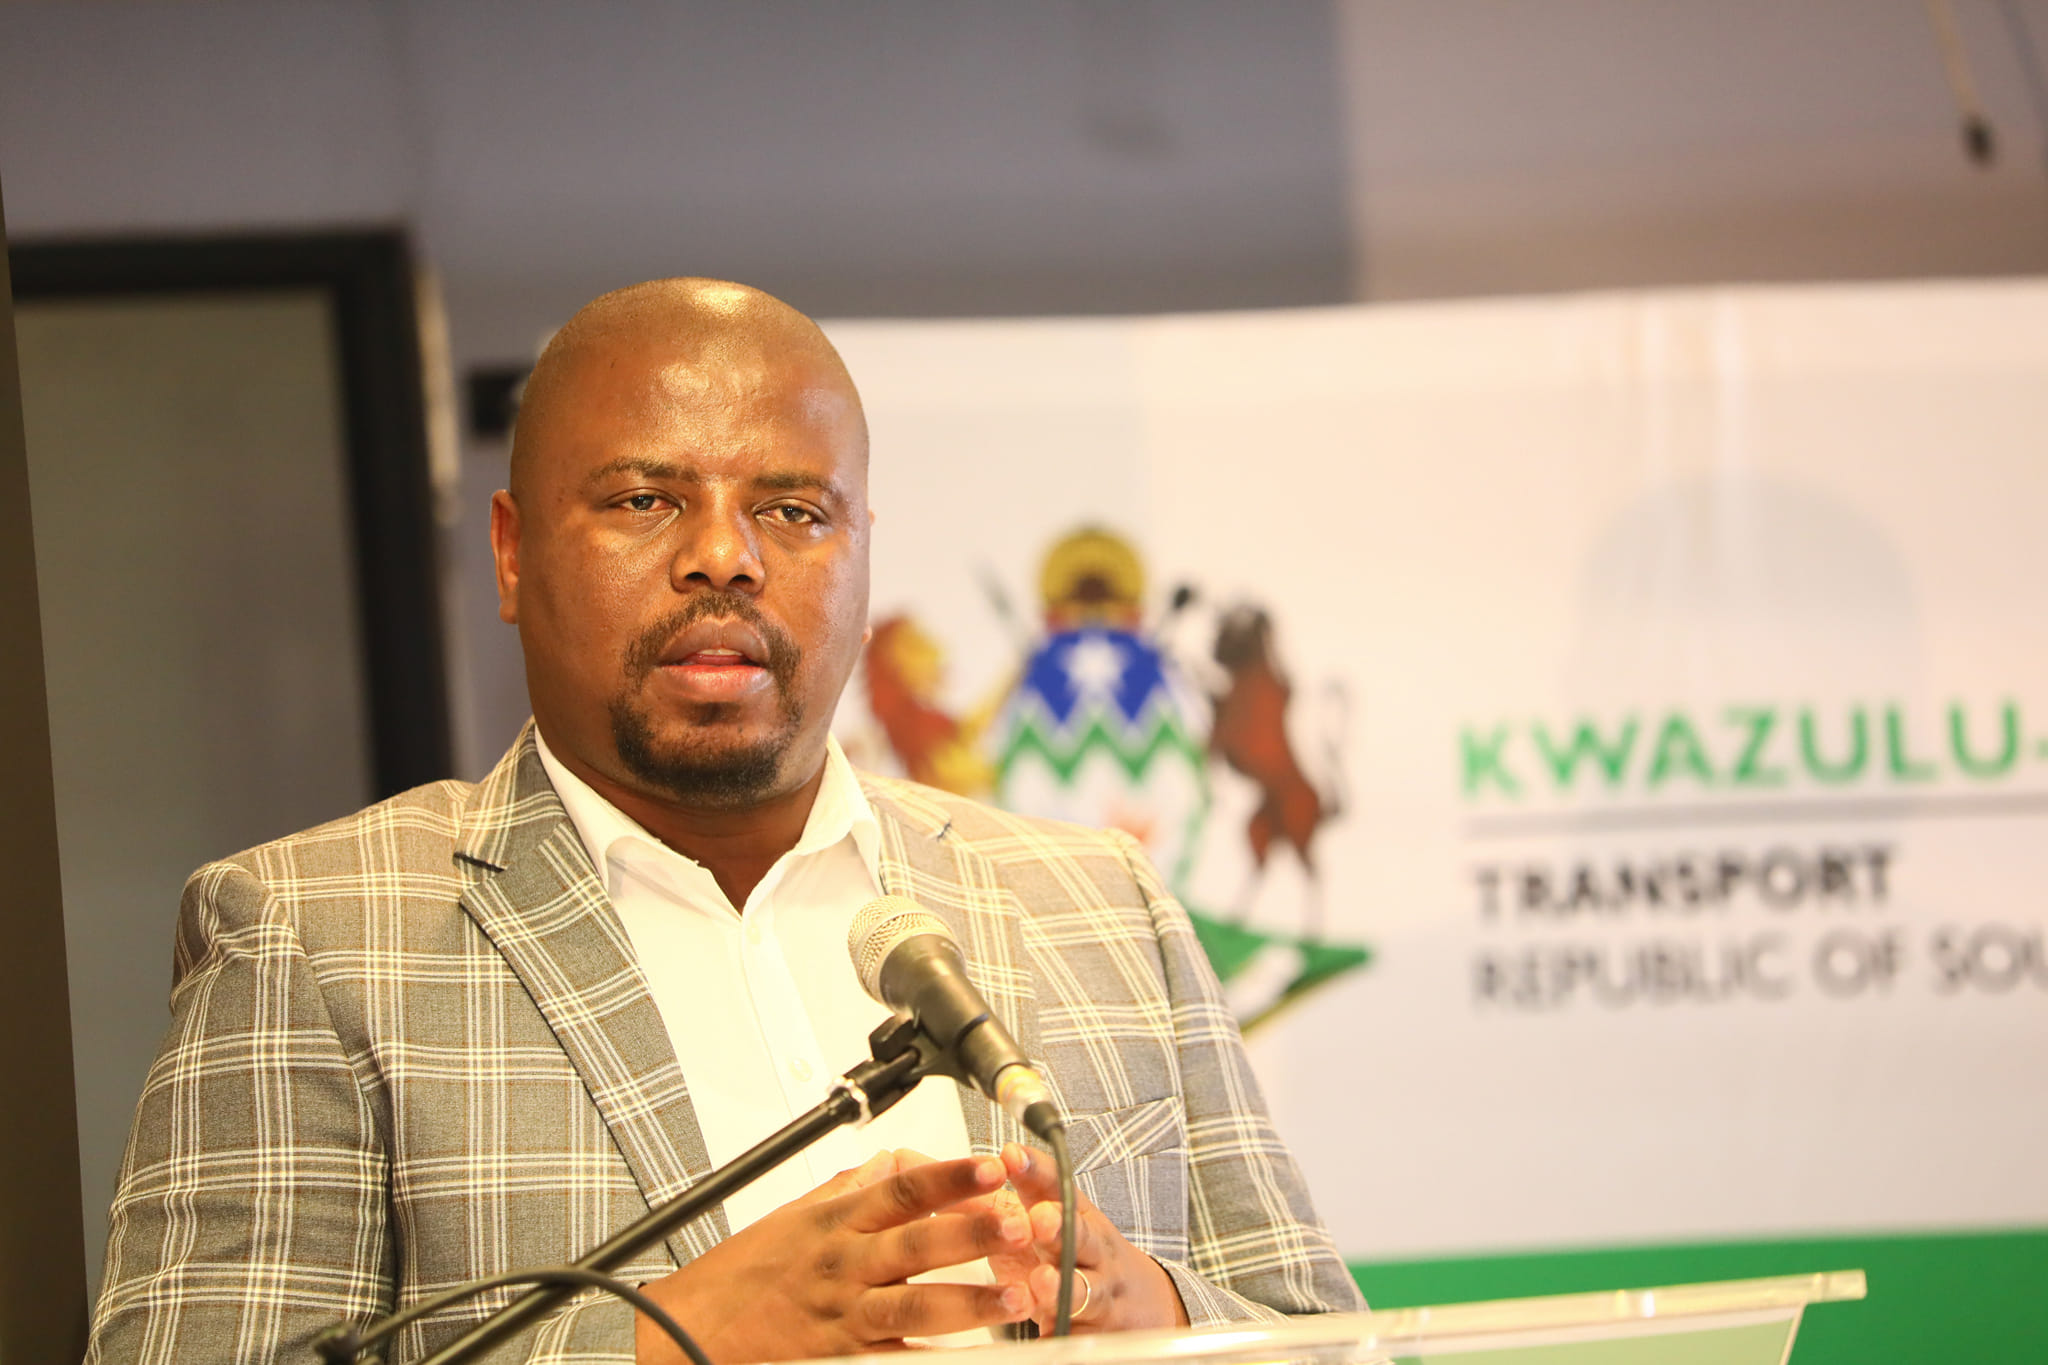 KZN Department of Transport hosted stakeholders and the media to give a report back on milestones achieved in their first 100 days in office